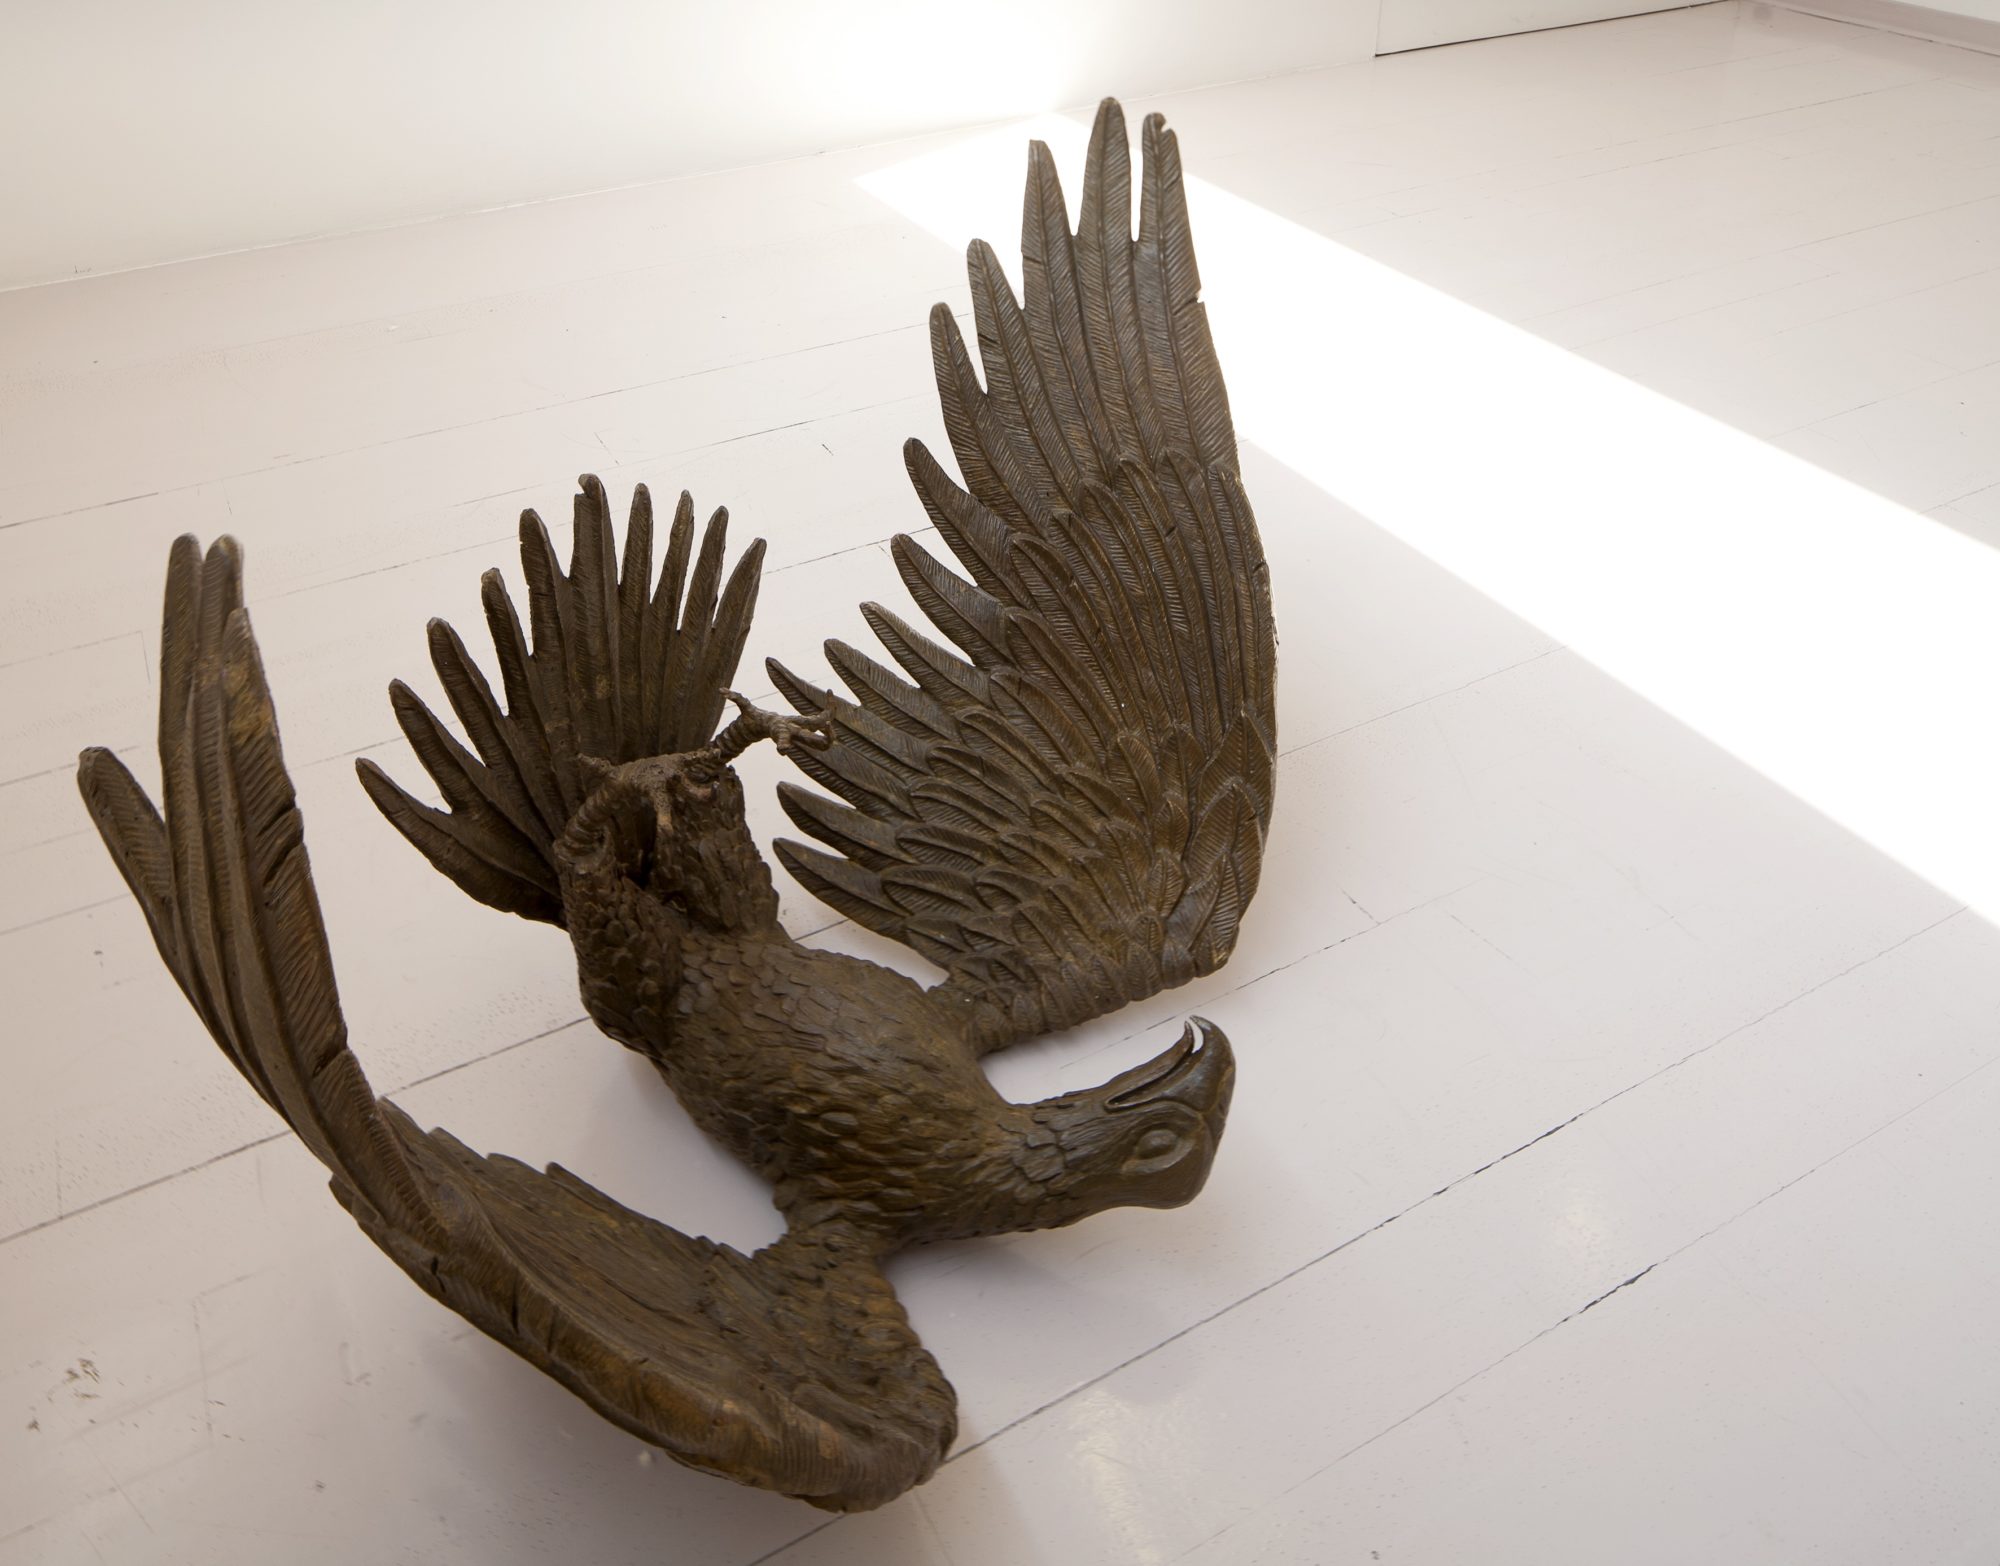 A bronze eagle statue laying on its back with upward sweeping wings and talons, set against a white wooden floor